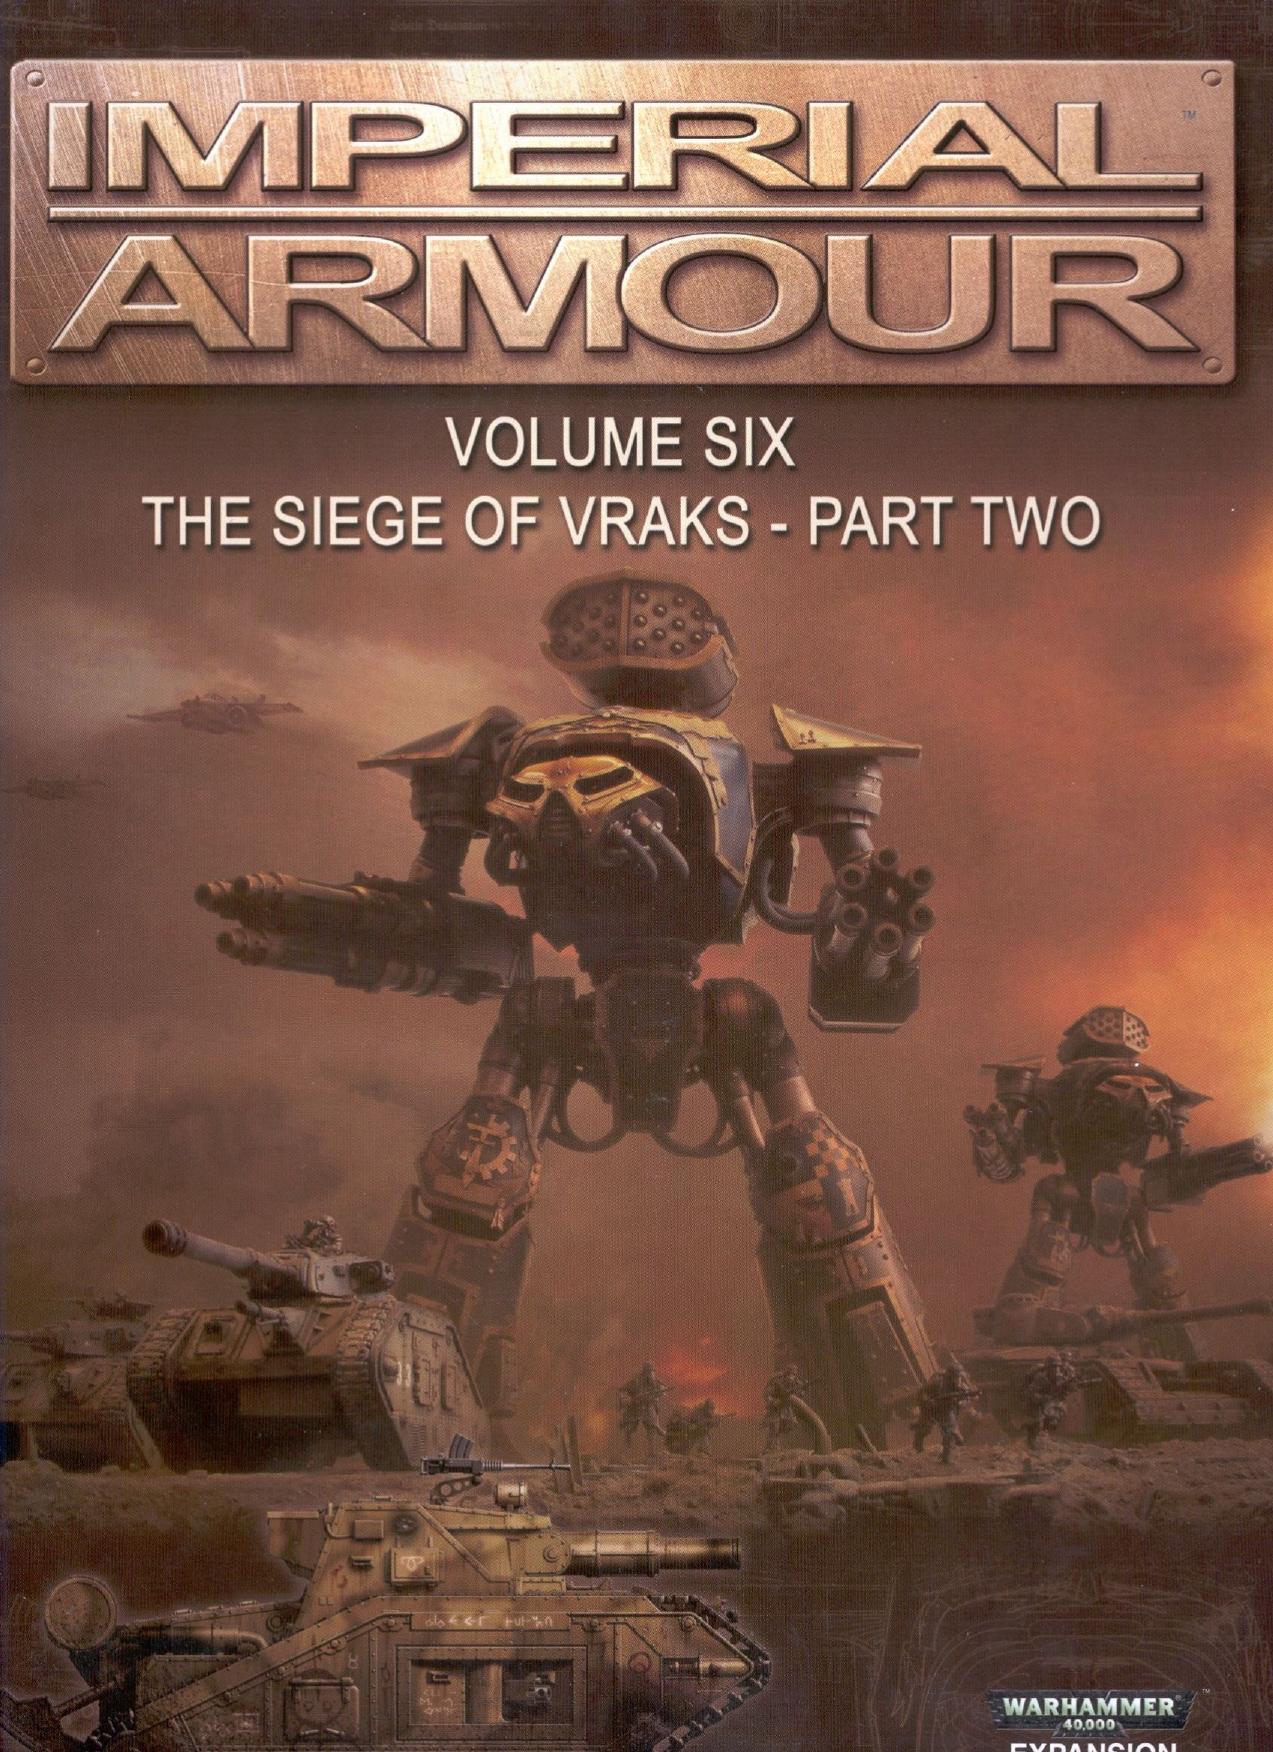 Imperial Armour Vol 6 The Siege of Vraks part 2